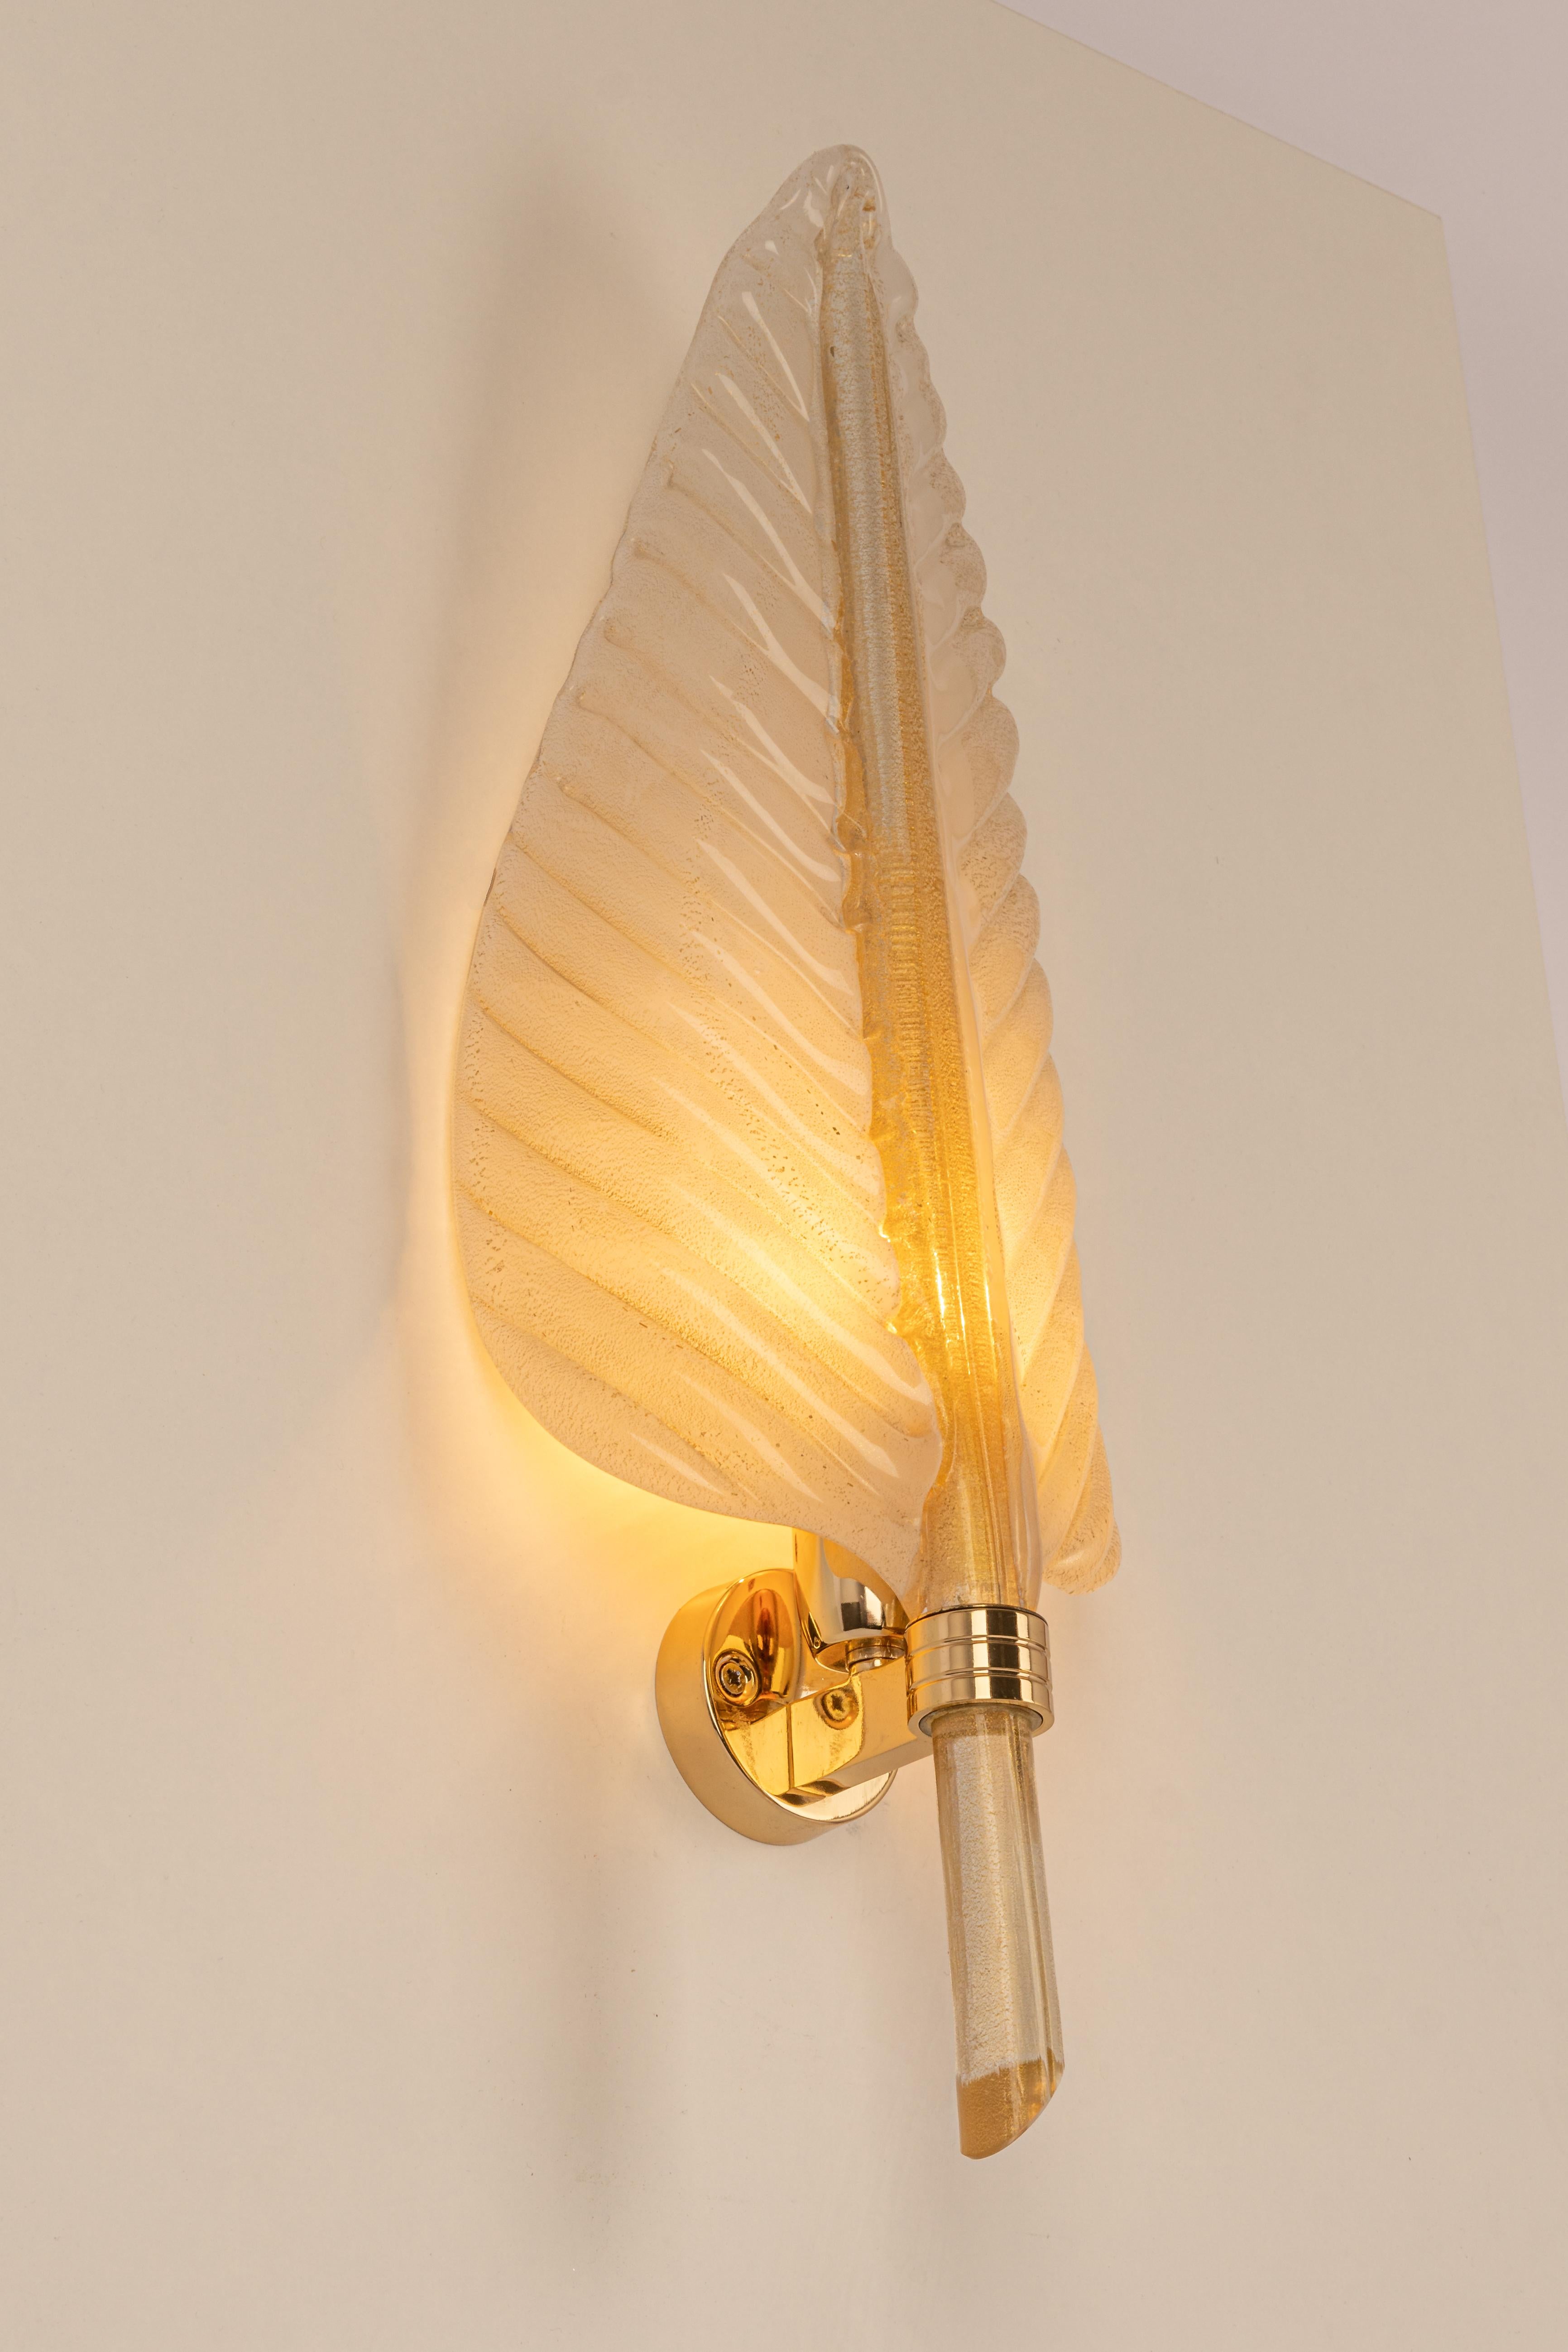 Pair of Murano Glass Wall Sconces by Barovier & Toso, Italy, 1970s For Sale 1